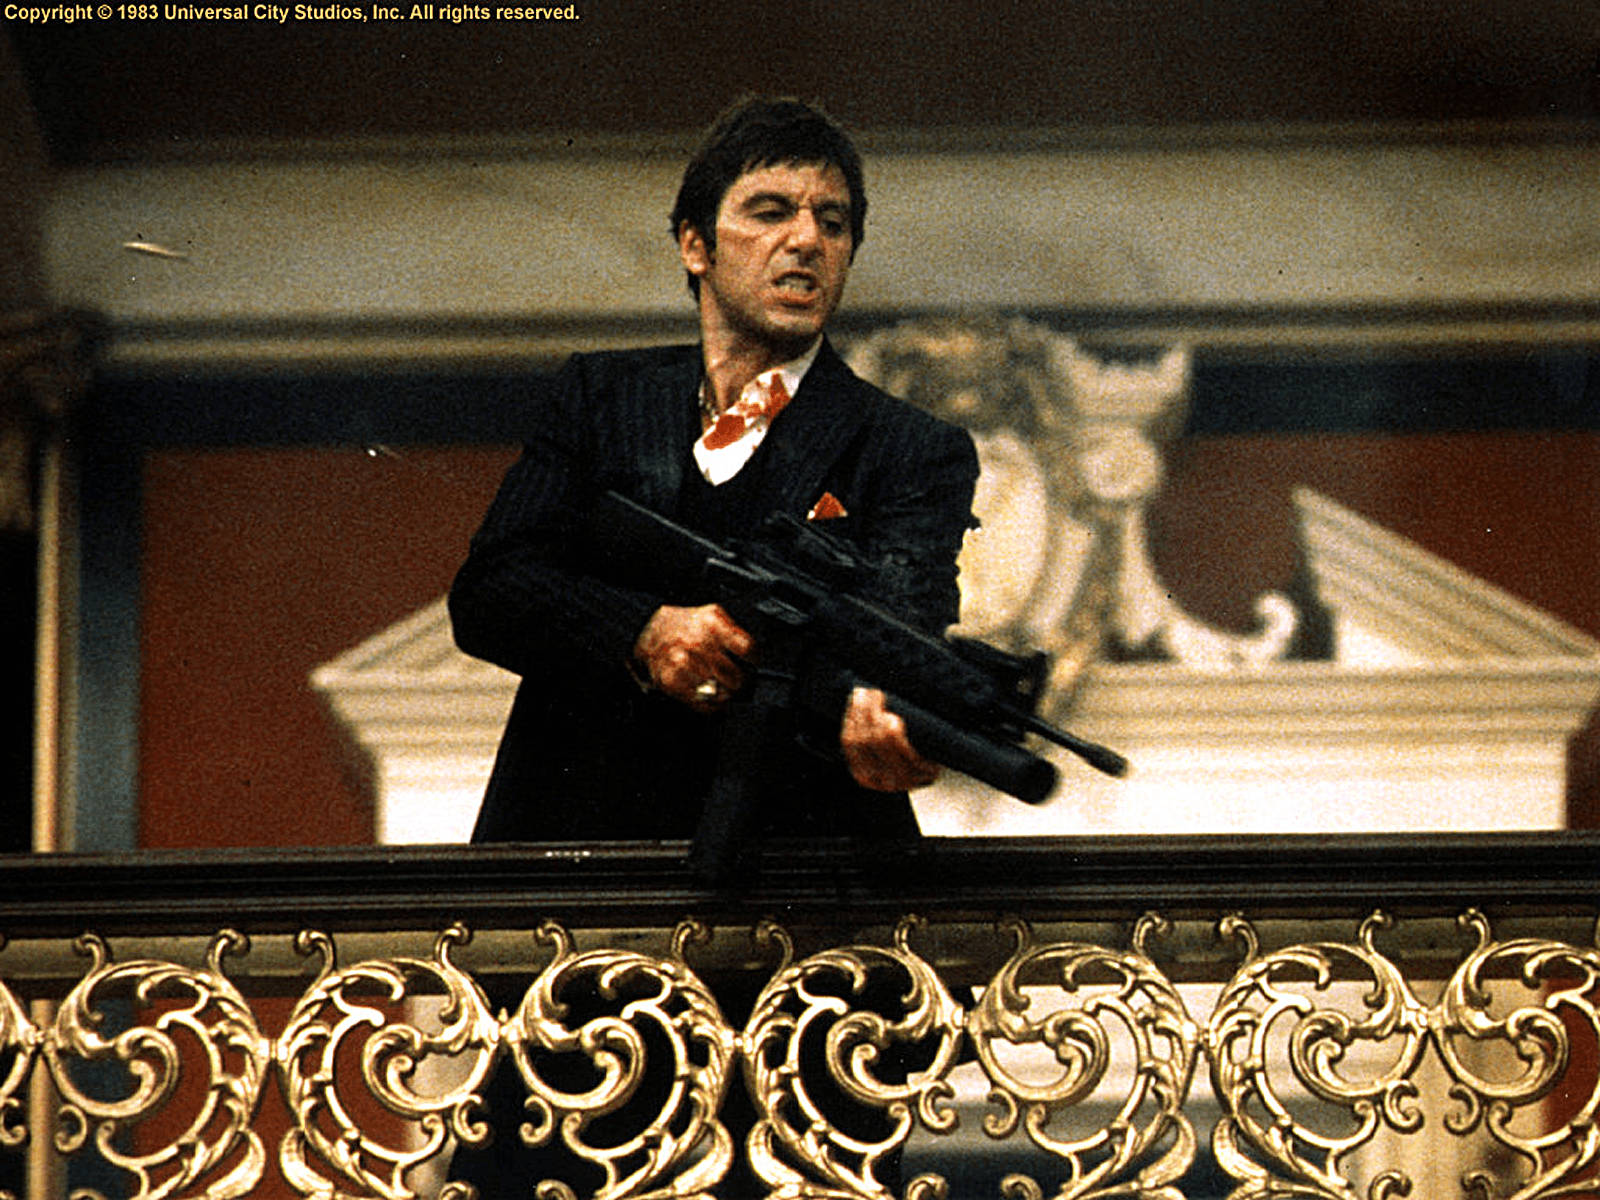 Scarface Holding A Gun Background